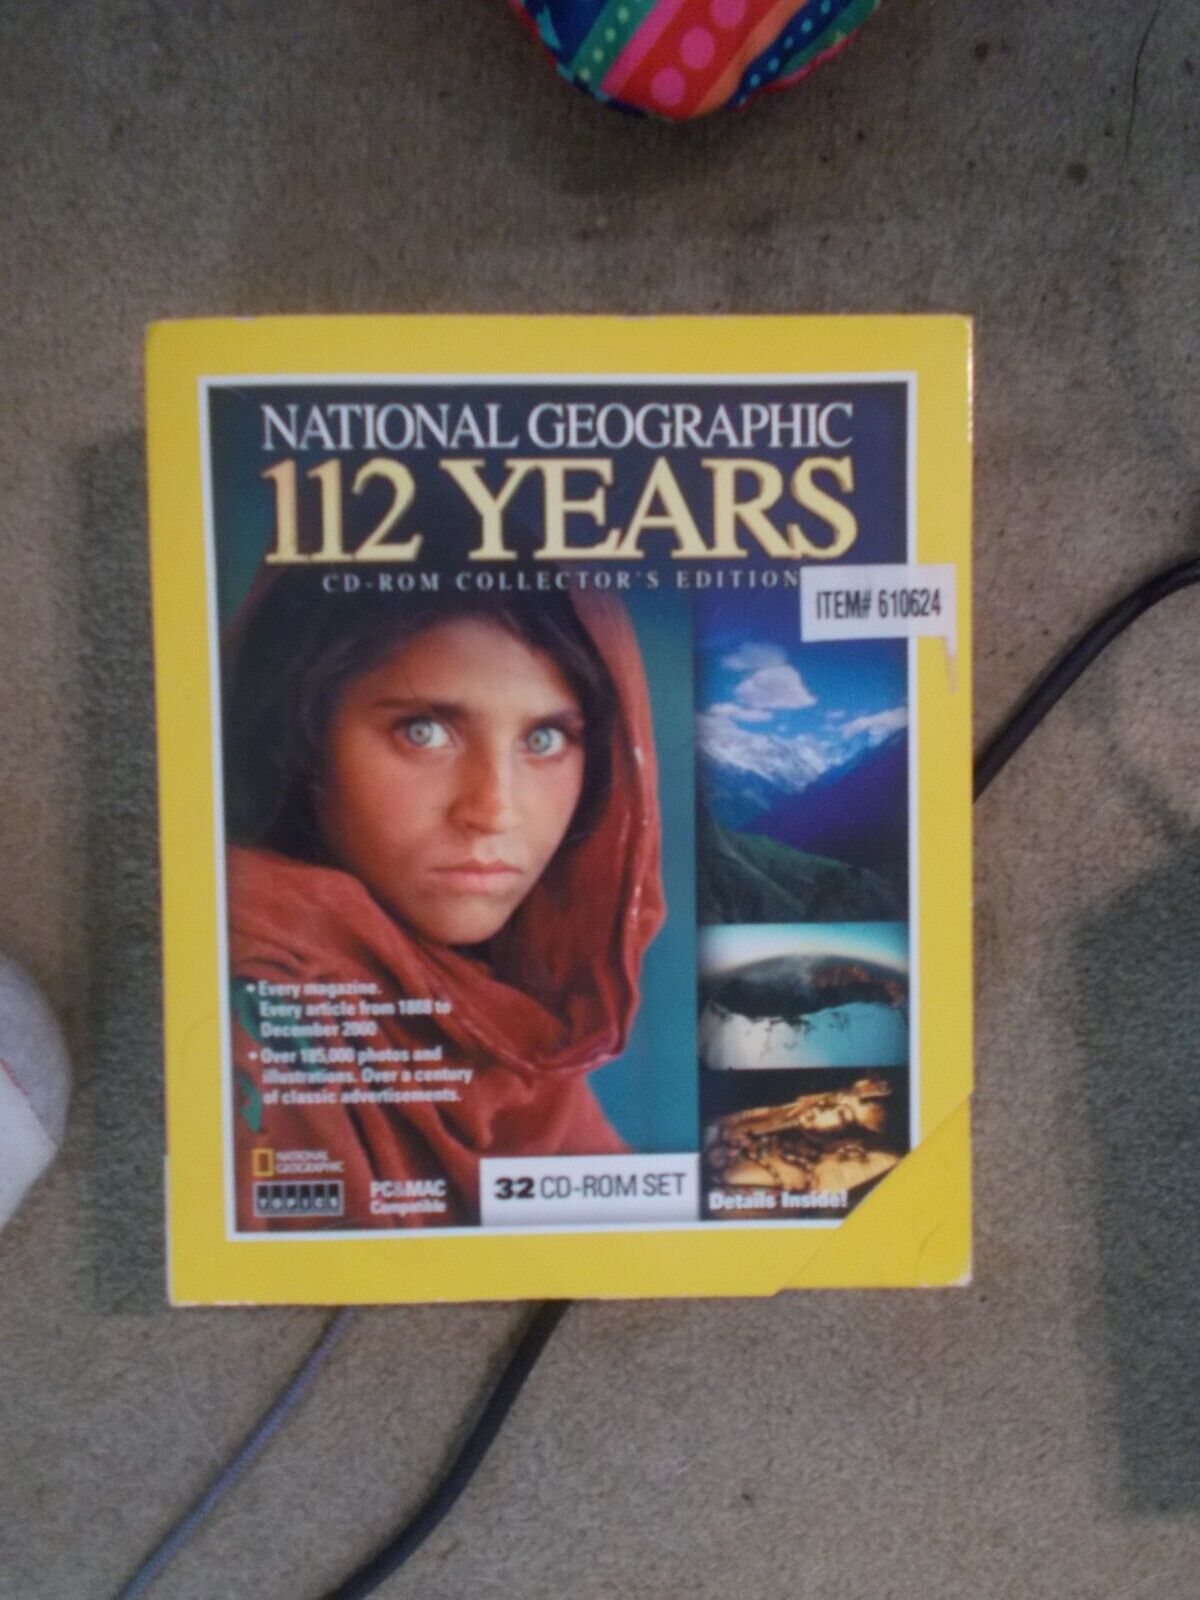 NATIONAL GEOGRAPHIC - 112 YEARS - 32-CD-ROM BOXED SET - CD-ROM